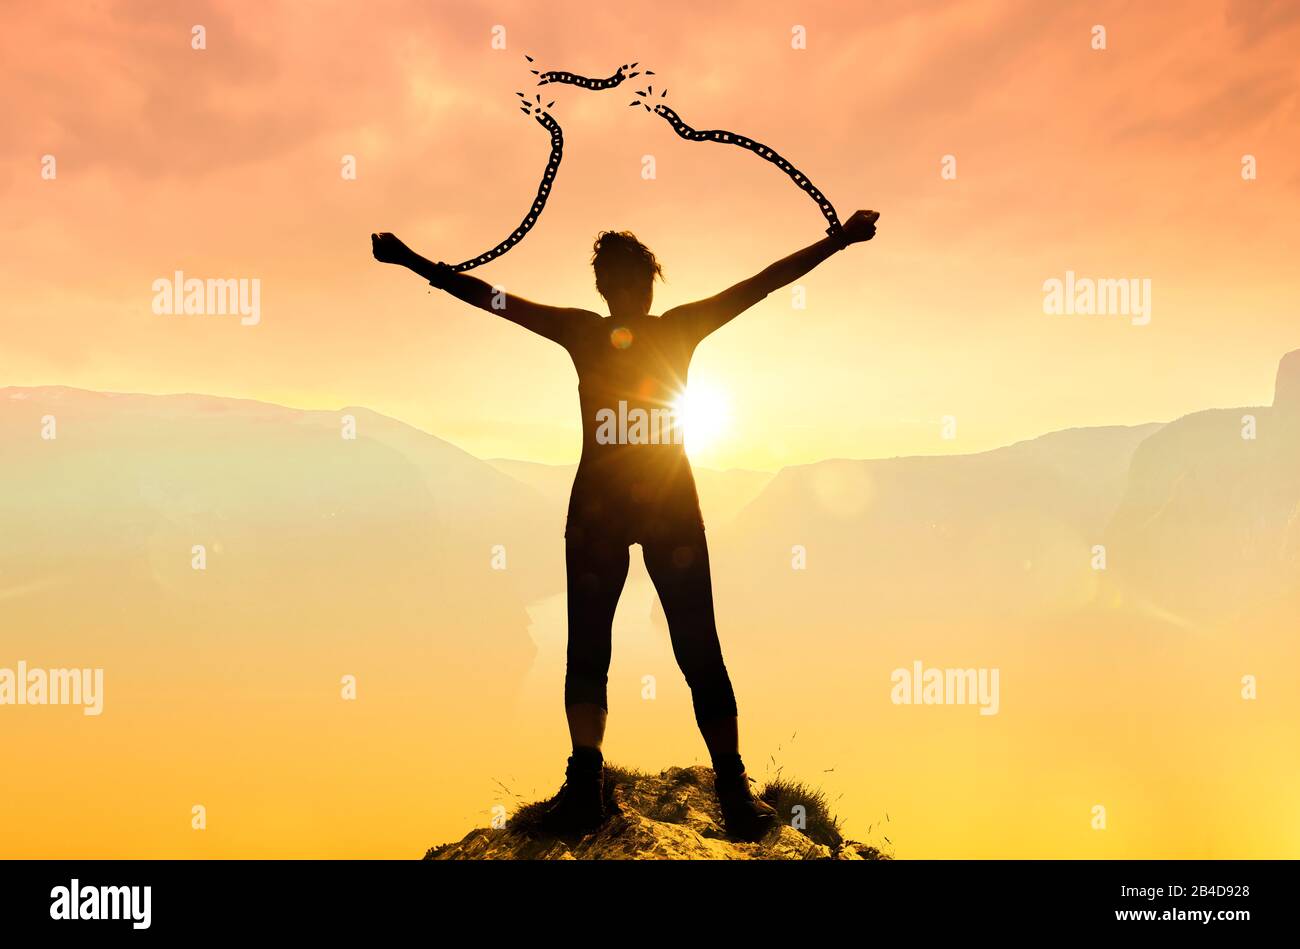 woman in chains Stock Photo - Alamy